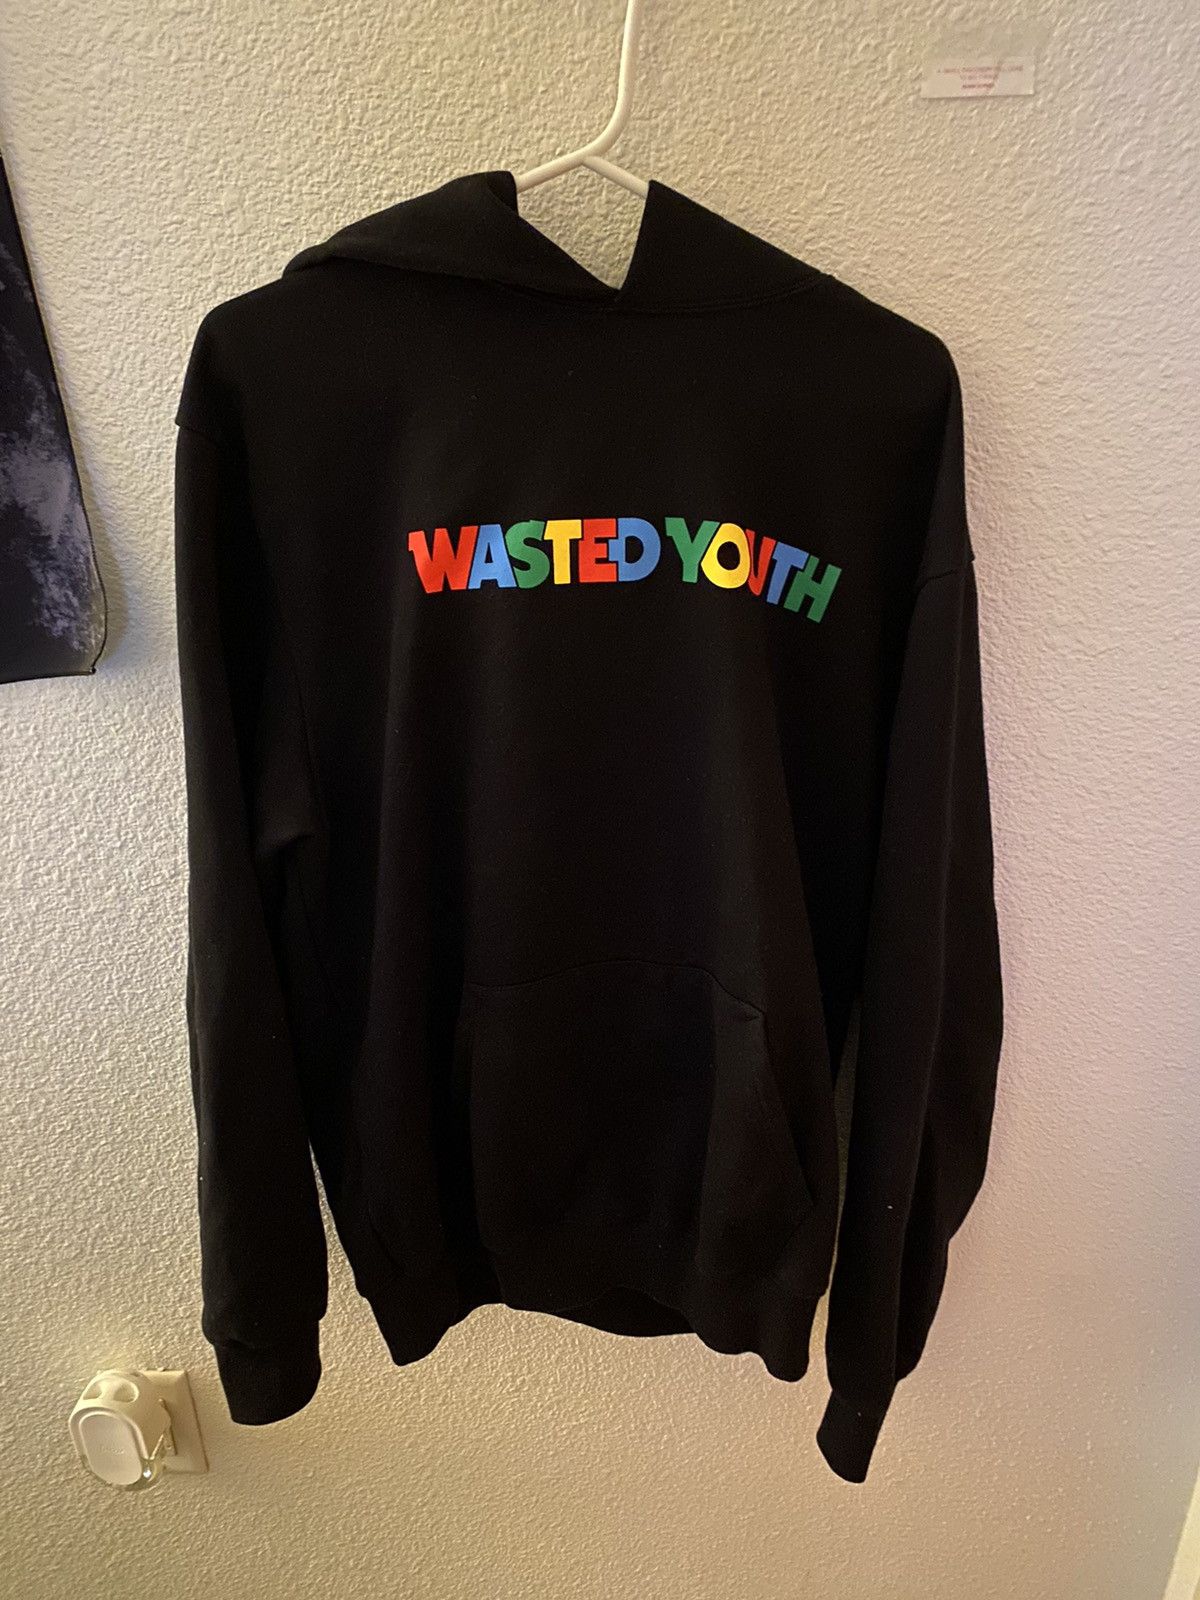 Streetwear Born X Raised Wasted Youth Limited Hoodie | Grailed